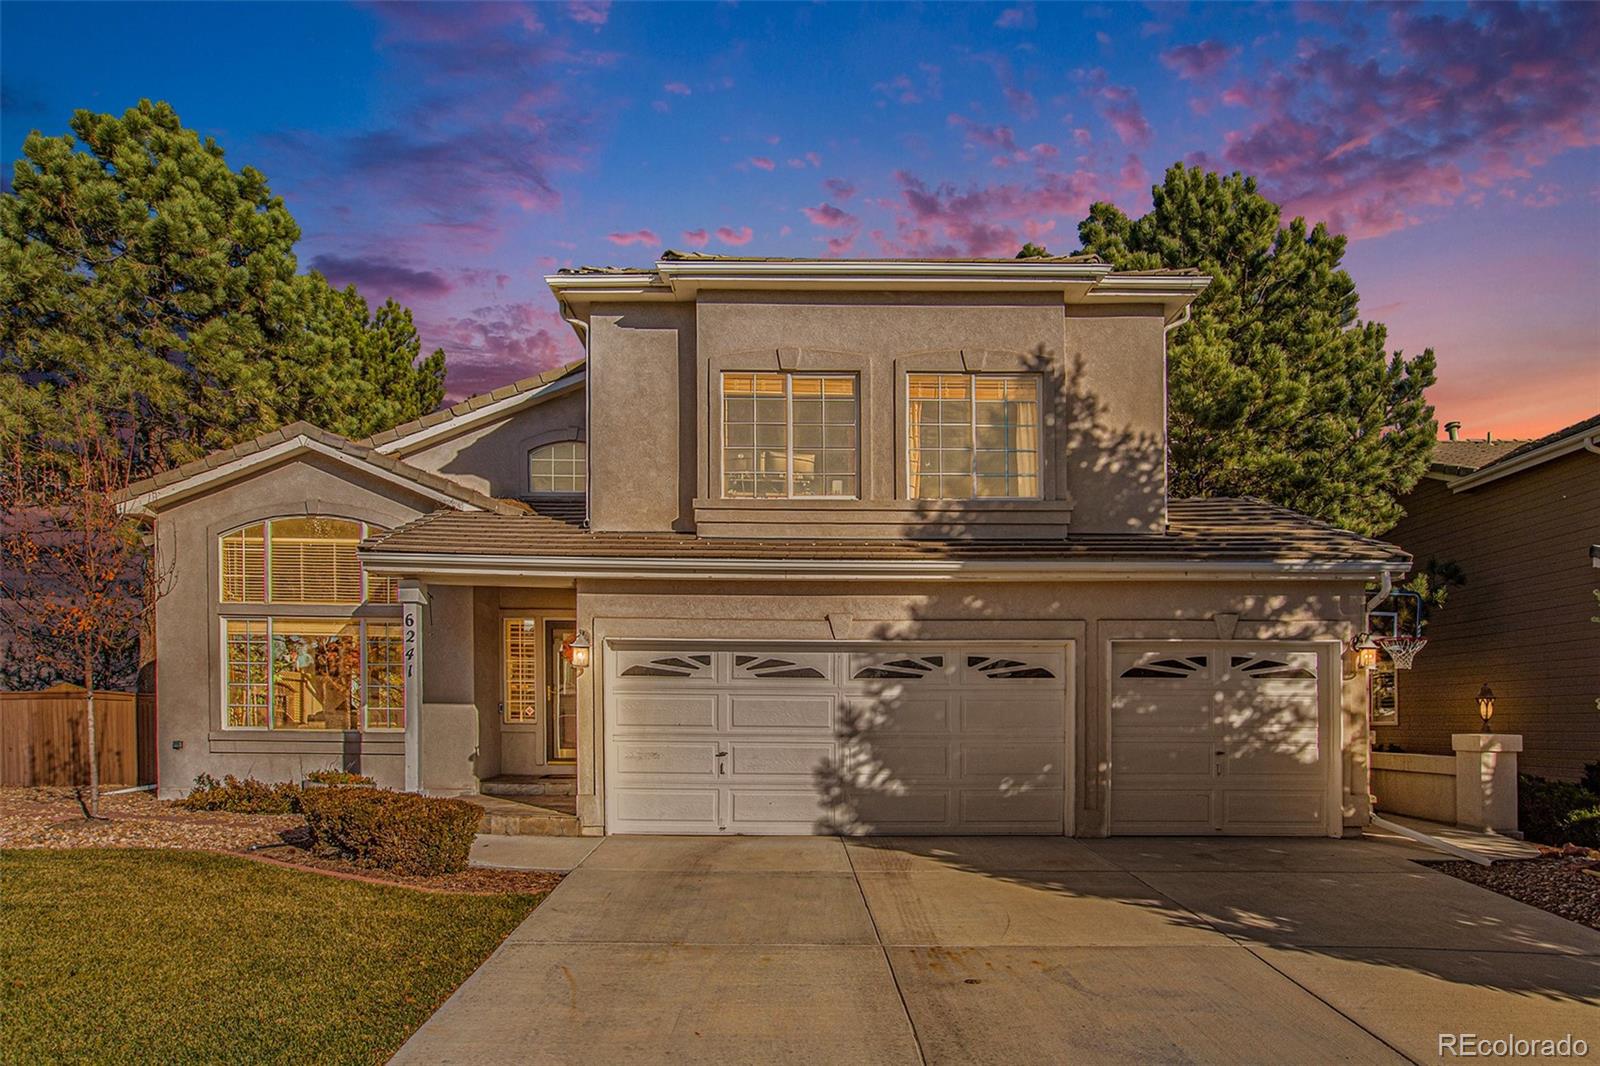 Report Image for 6241  Shea Place,Highlands Ranch, Colorado